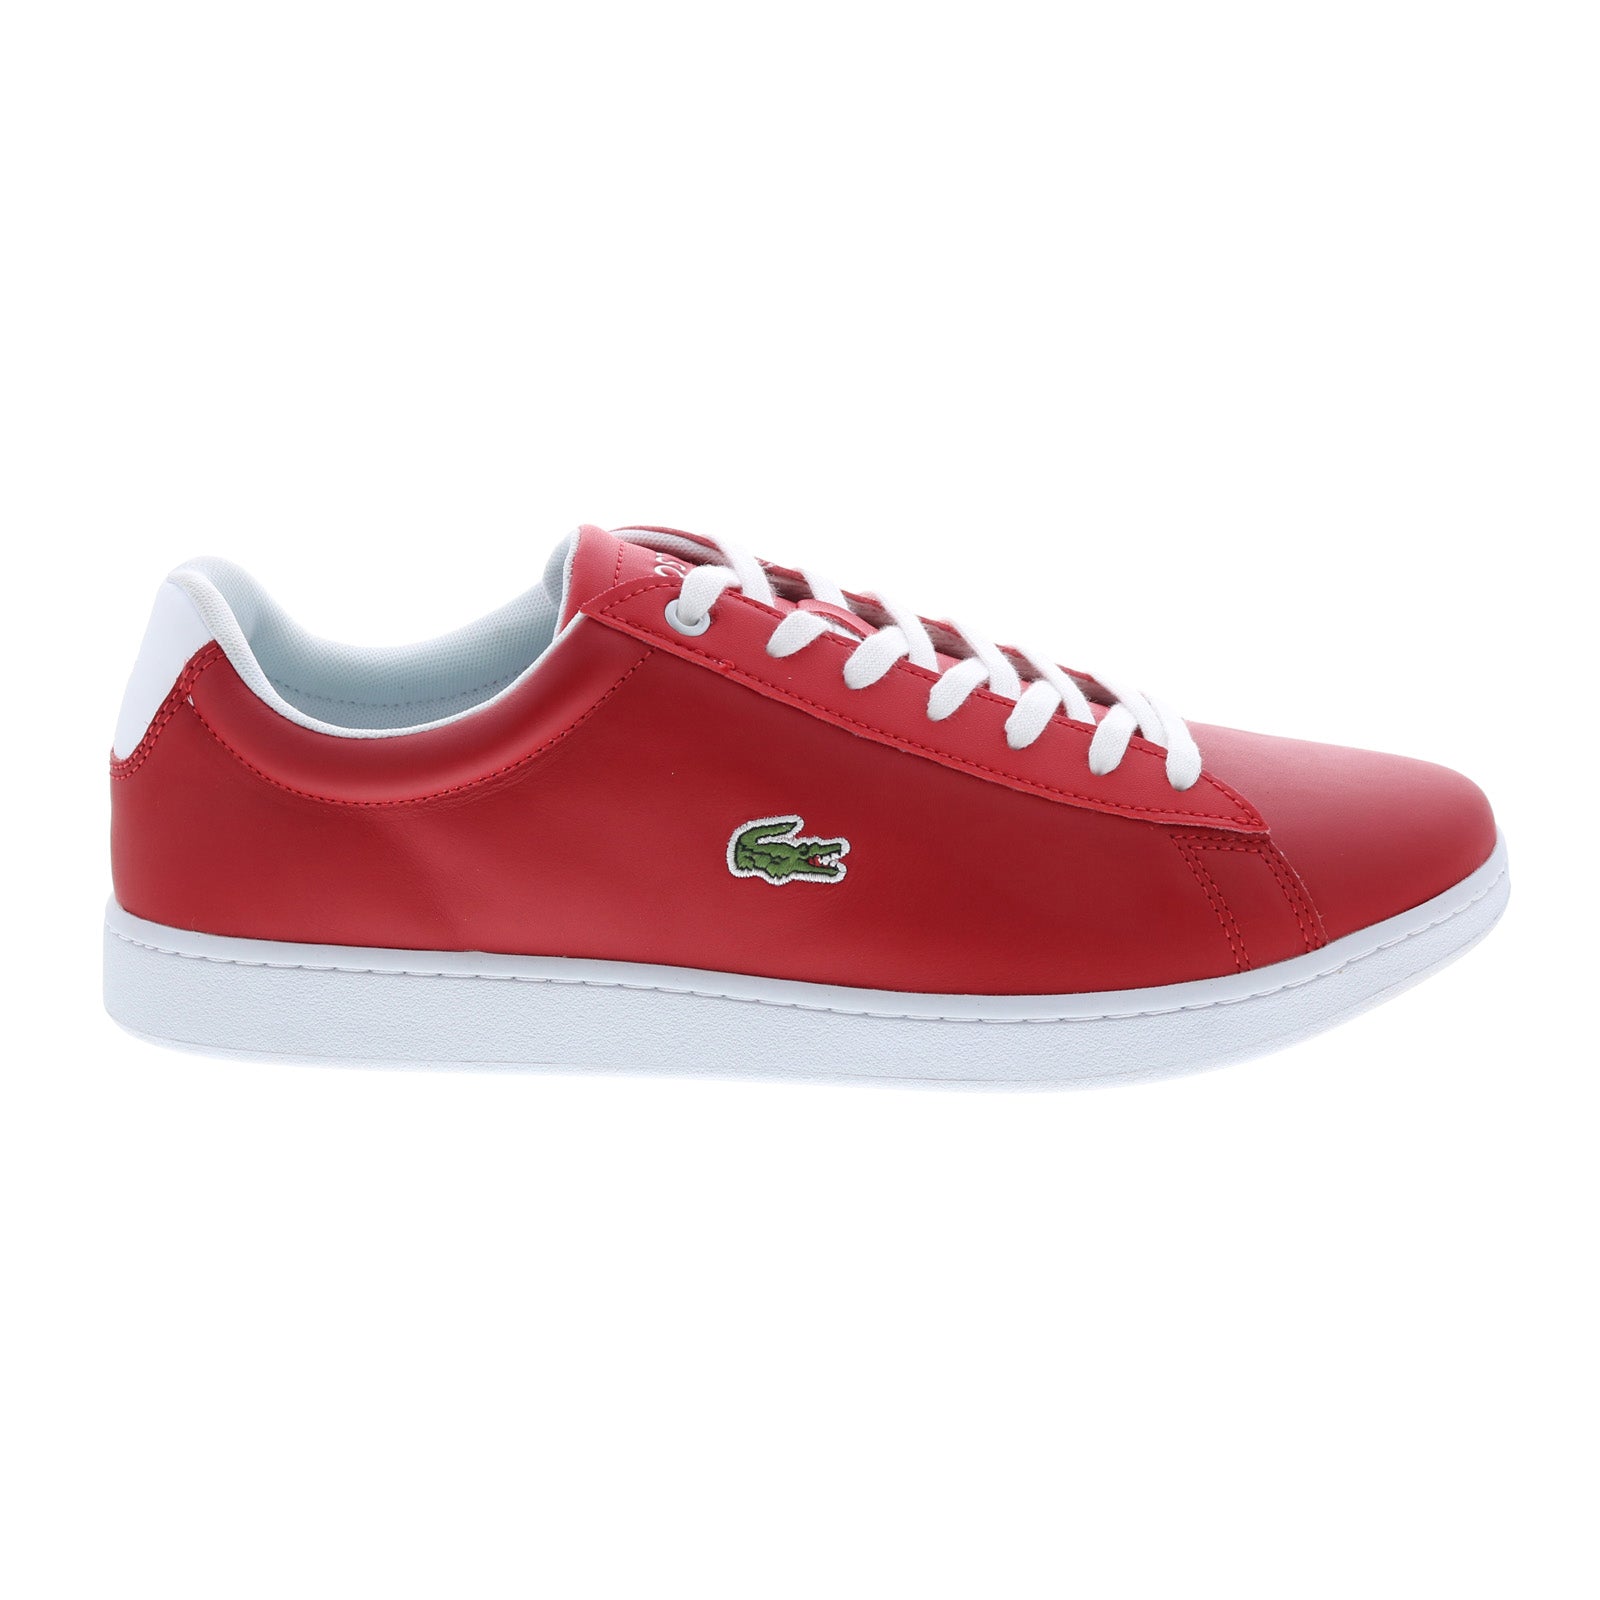 Lacoste Hydez 0721 1 P Sma Mens Red Leather Sneakers - Ruze Shoes